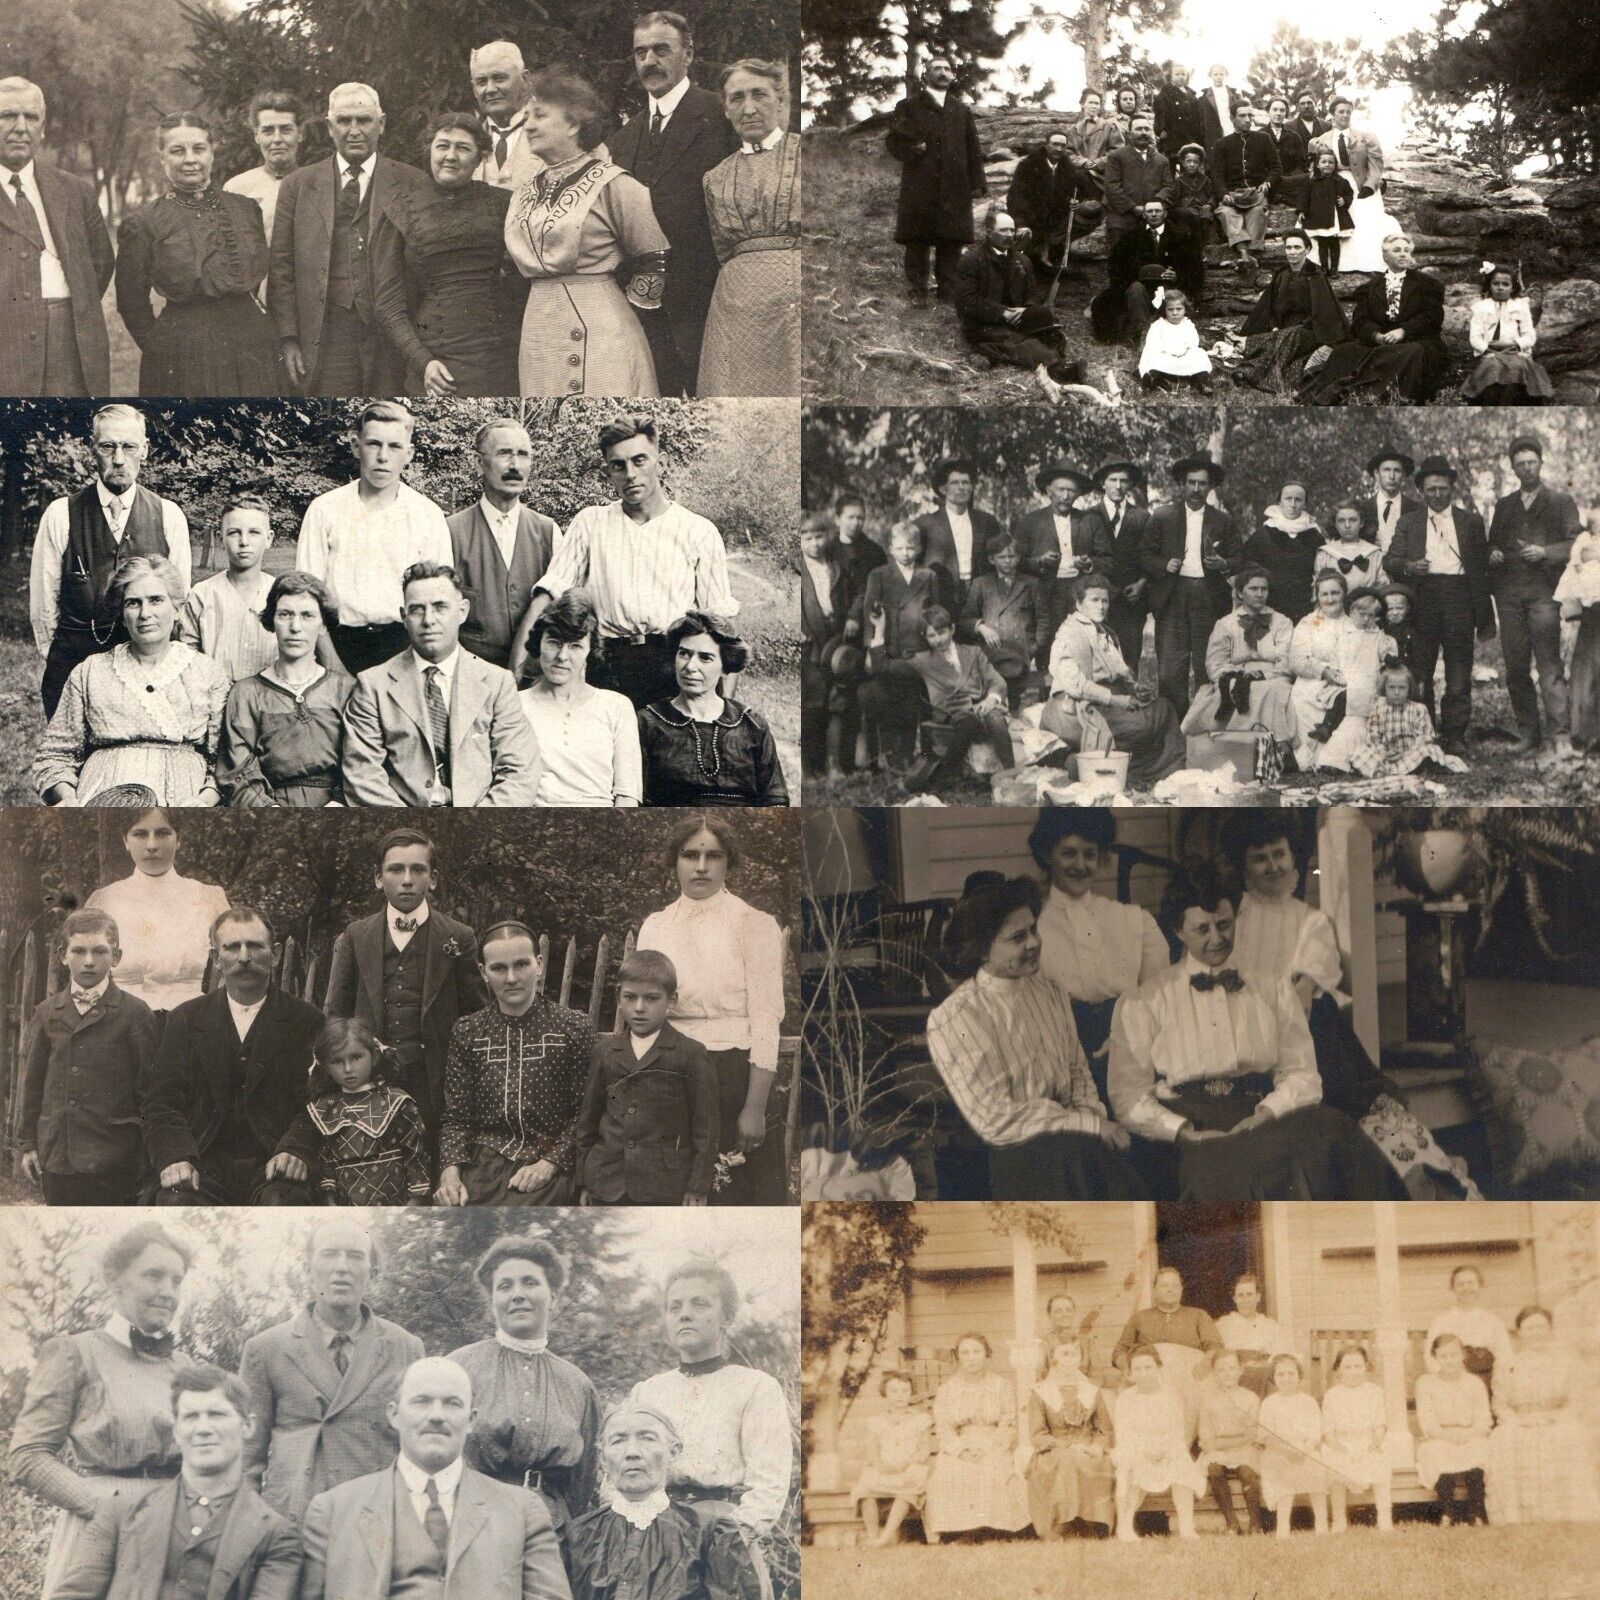 x8 LOT c1910s Groups of People RPPC Family Picnic Real Photo Postcards Kids A175